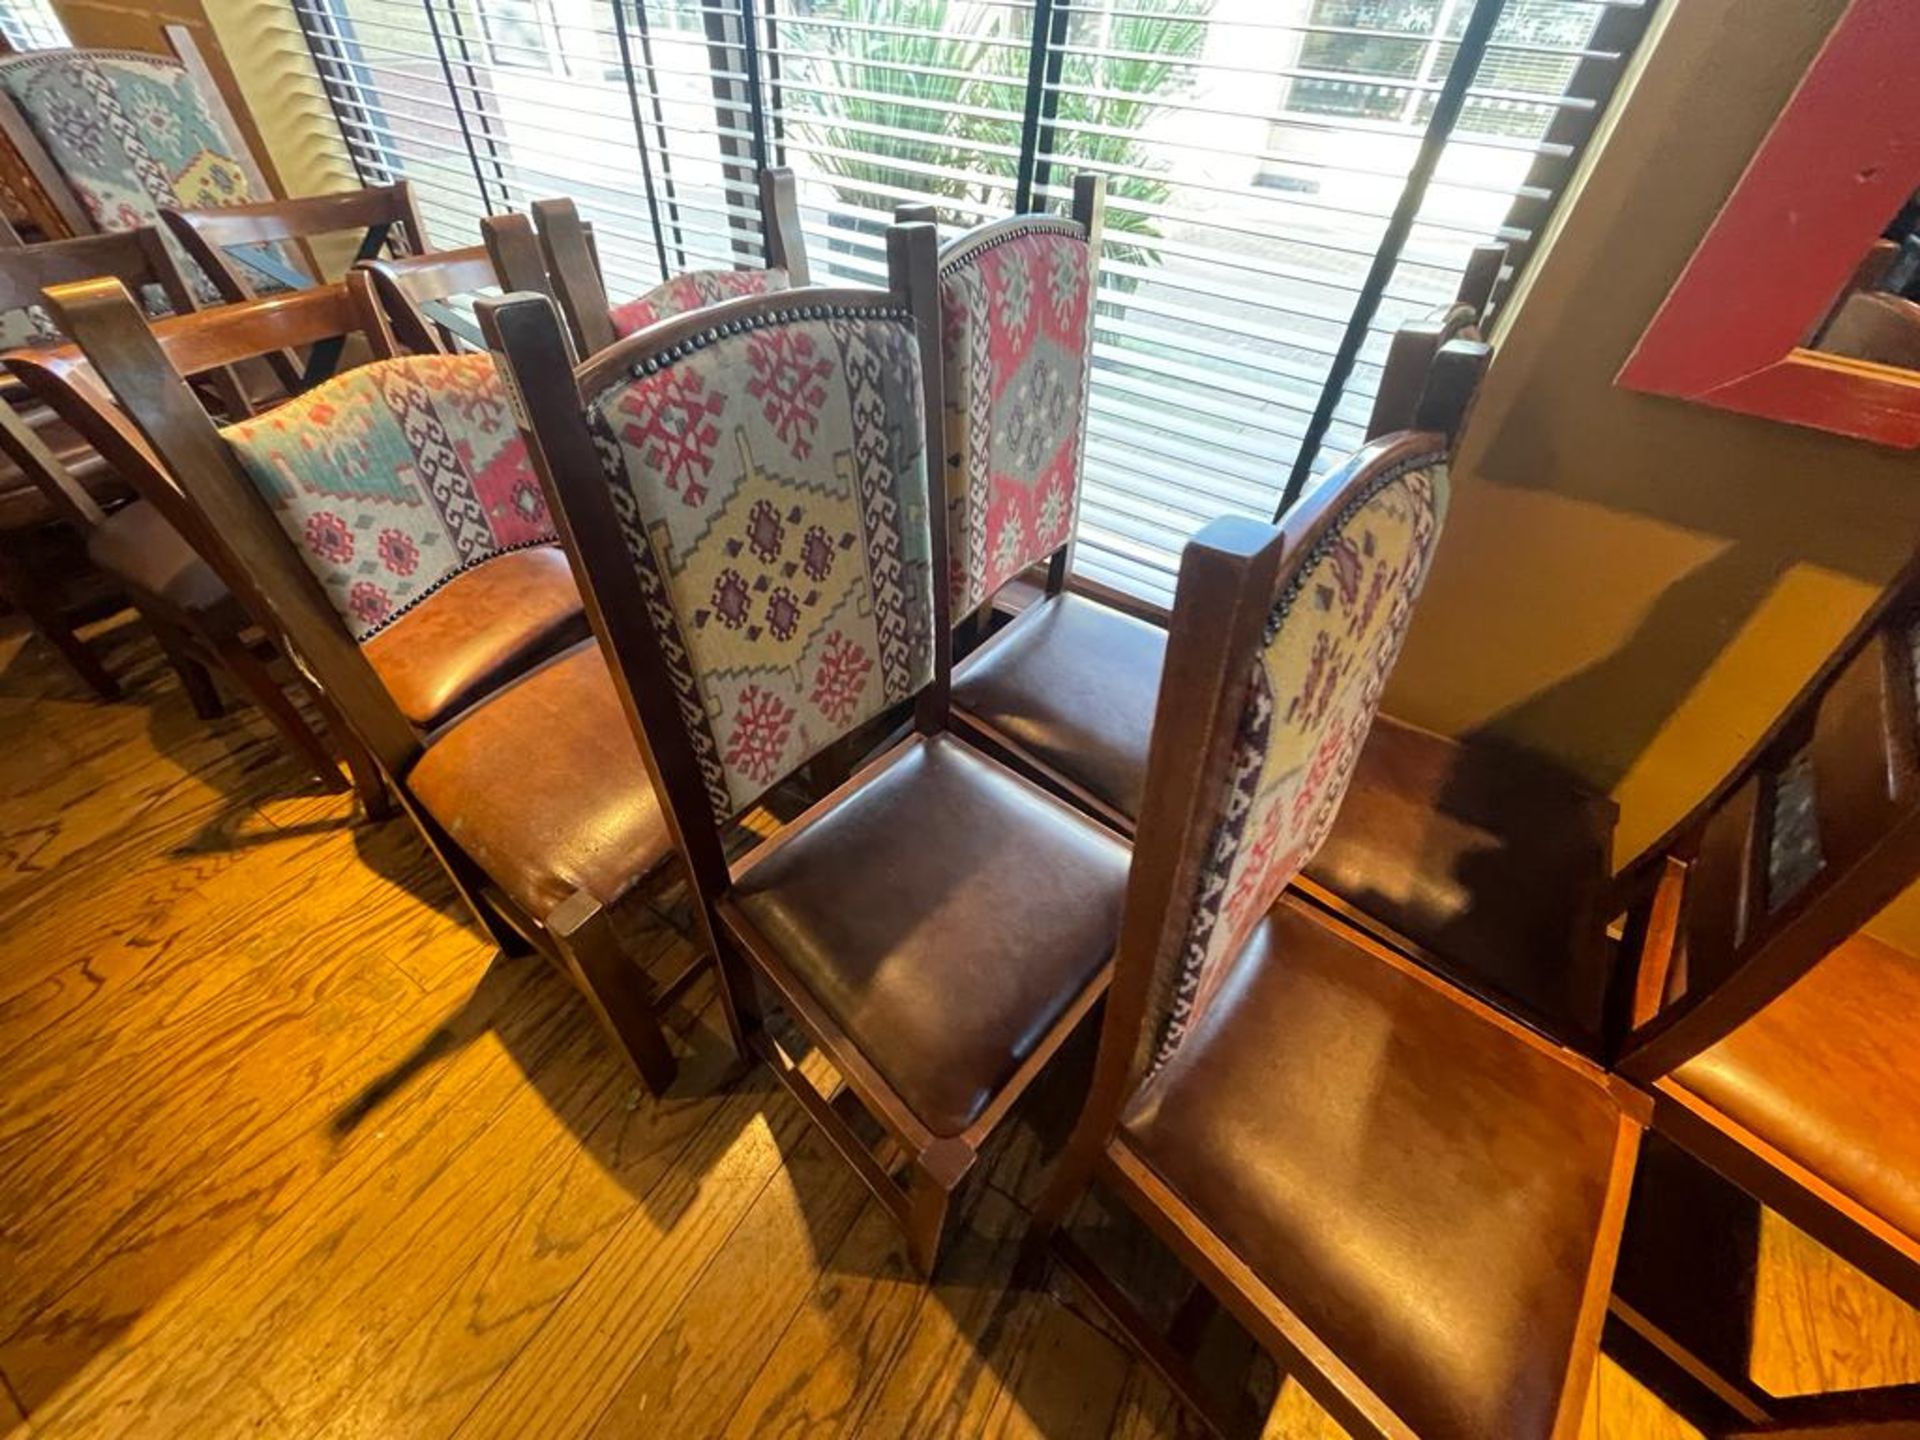 15 x High Back Dining Chairs From a Mexican Themed Restaurant - Features Wooden Frames, Brown Seat - Image 4 of 9